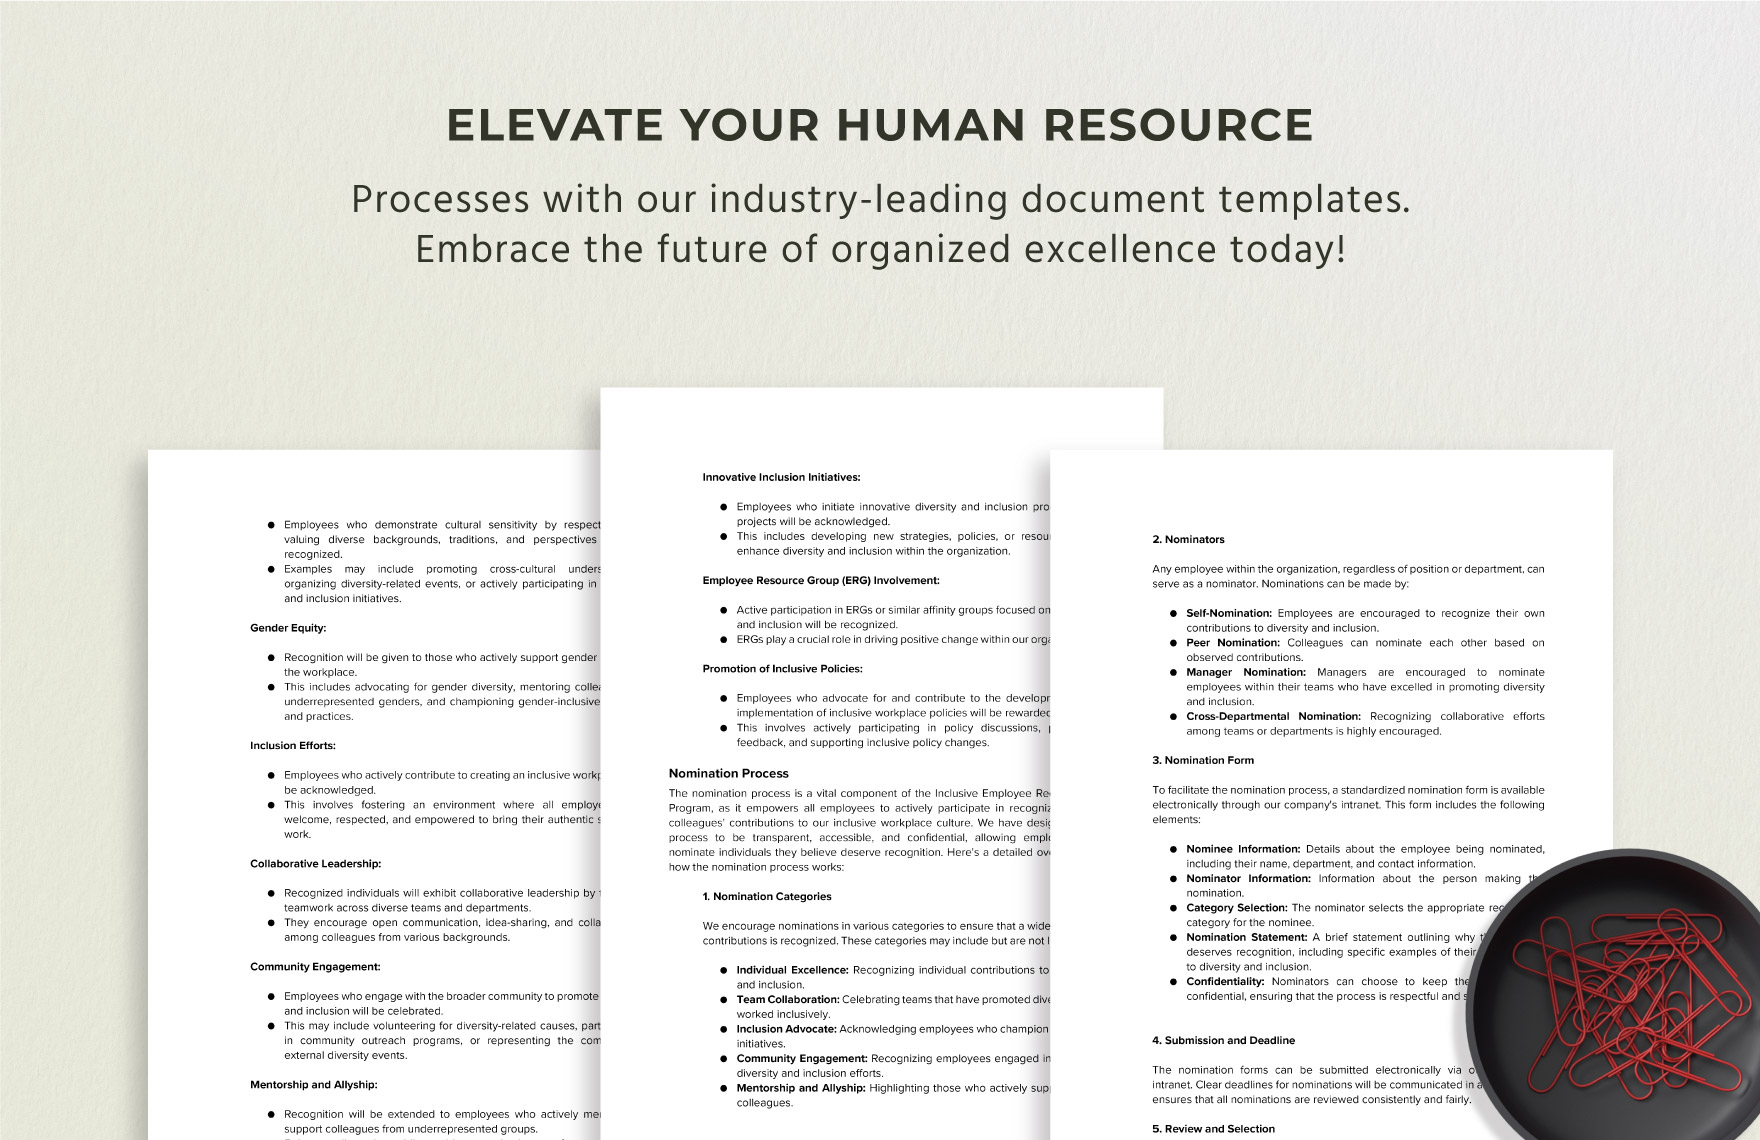 Inclusive Employee Recognition Program HR Template